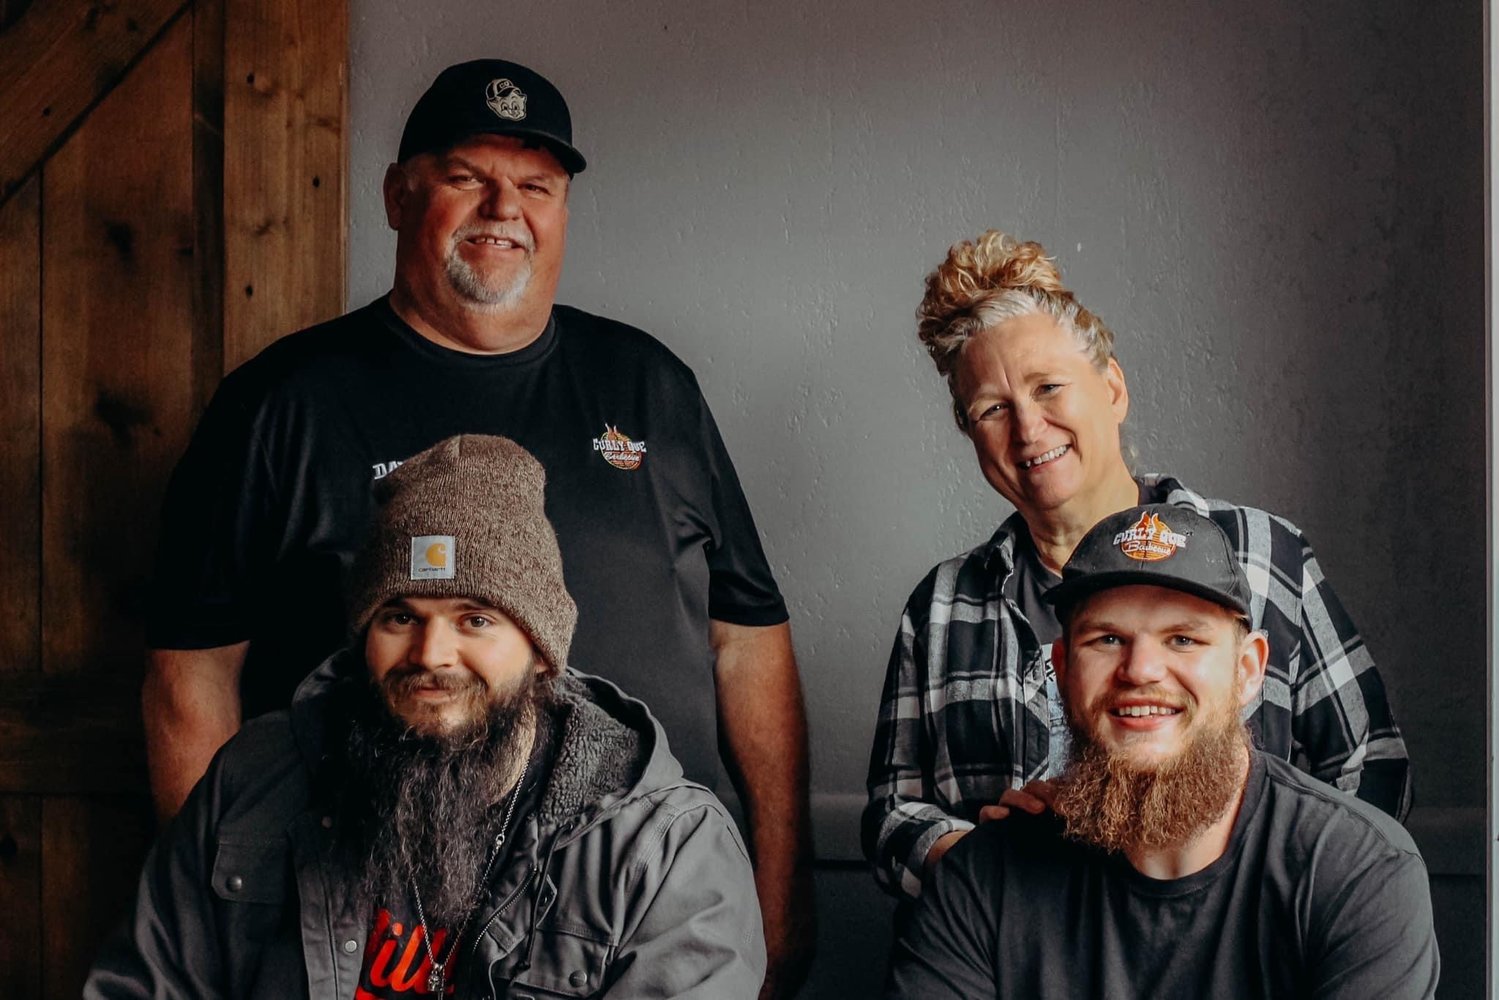 Bolivar-based Curly Que Barbecue, led by David and Cindi Lockhart, back row, their son, Jake Lockhart, bottom right, and his friend Jacob Mills, plans to expand to Springfield next month.